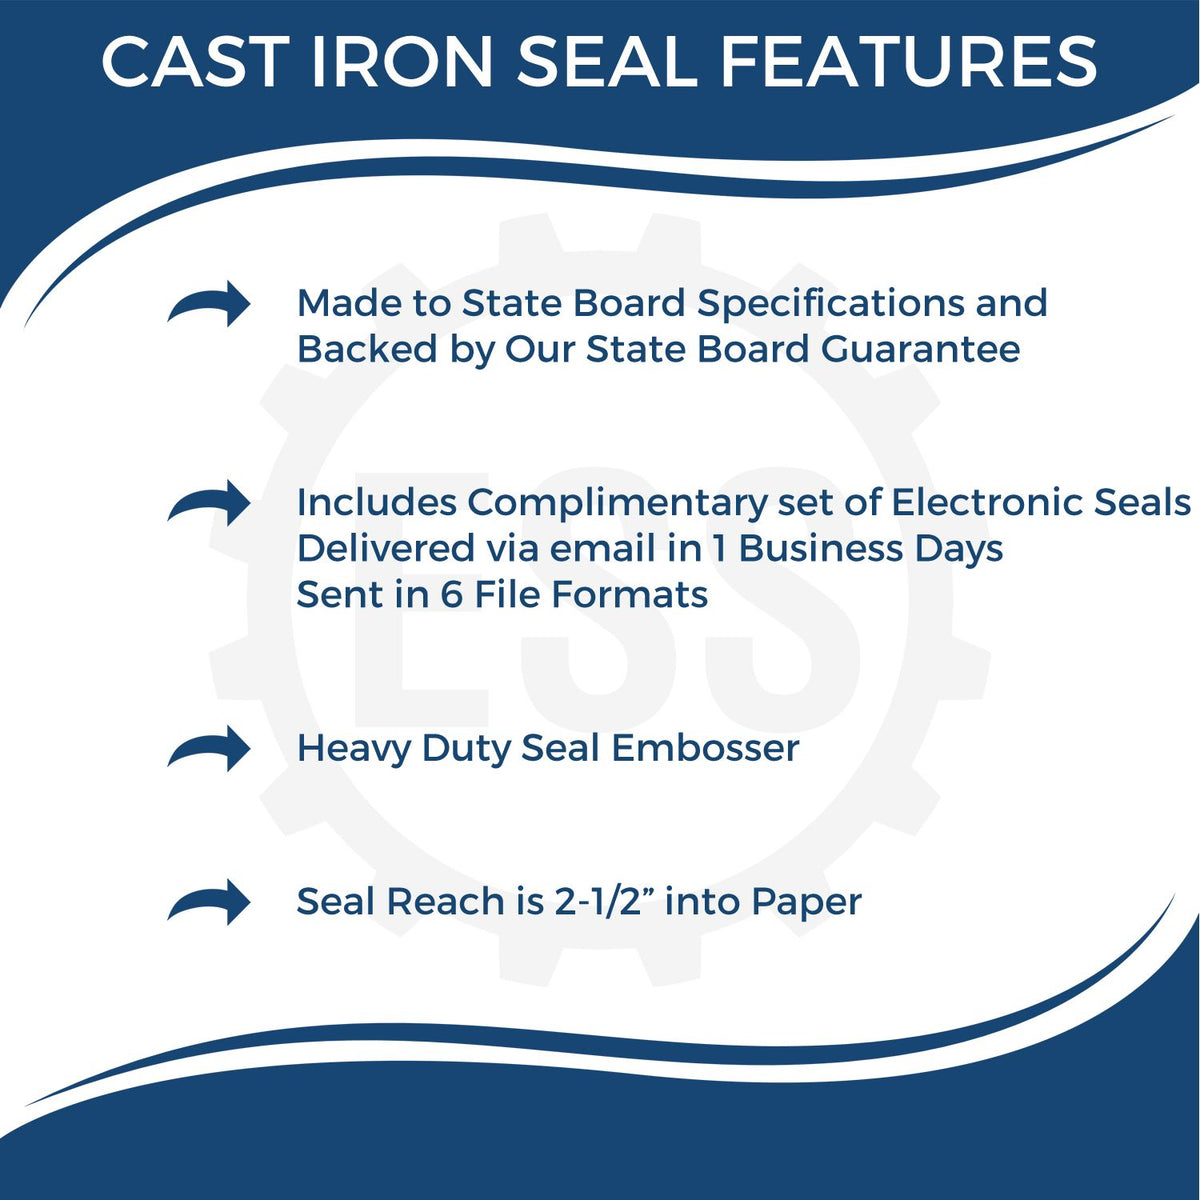 A picture of an infographic highlighting the selling points for the Heavy Duty Cast Iron Pennsylvania Geologist Seal Embosser